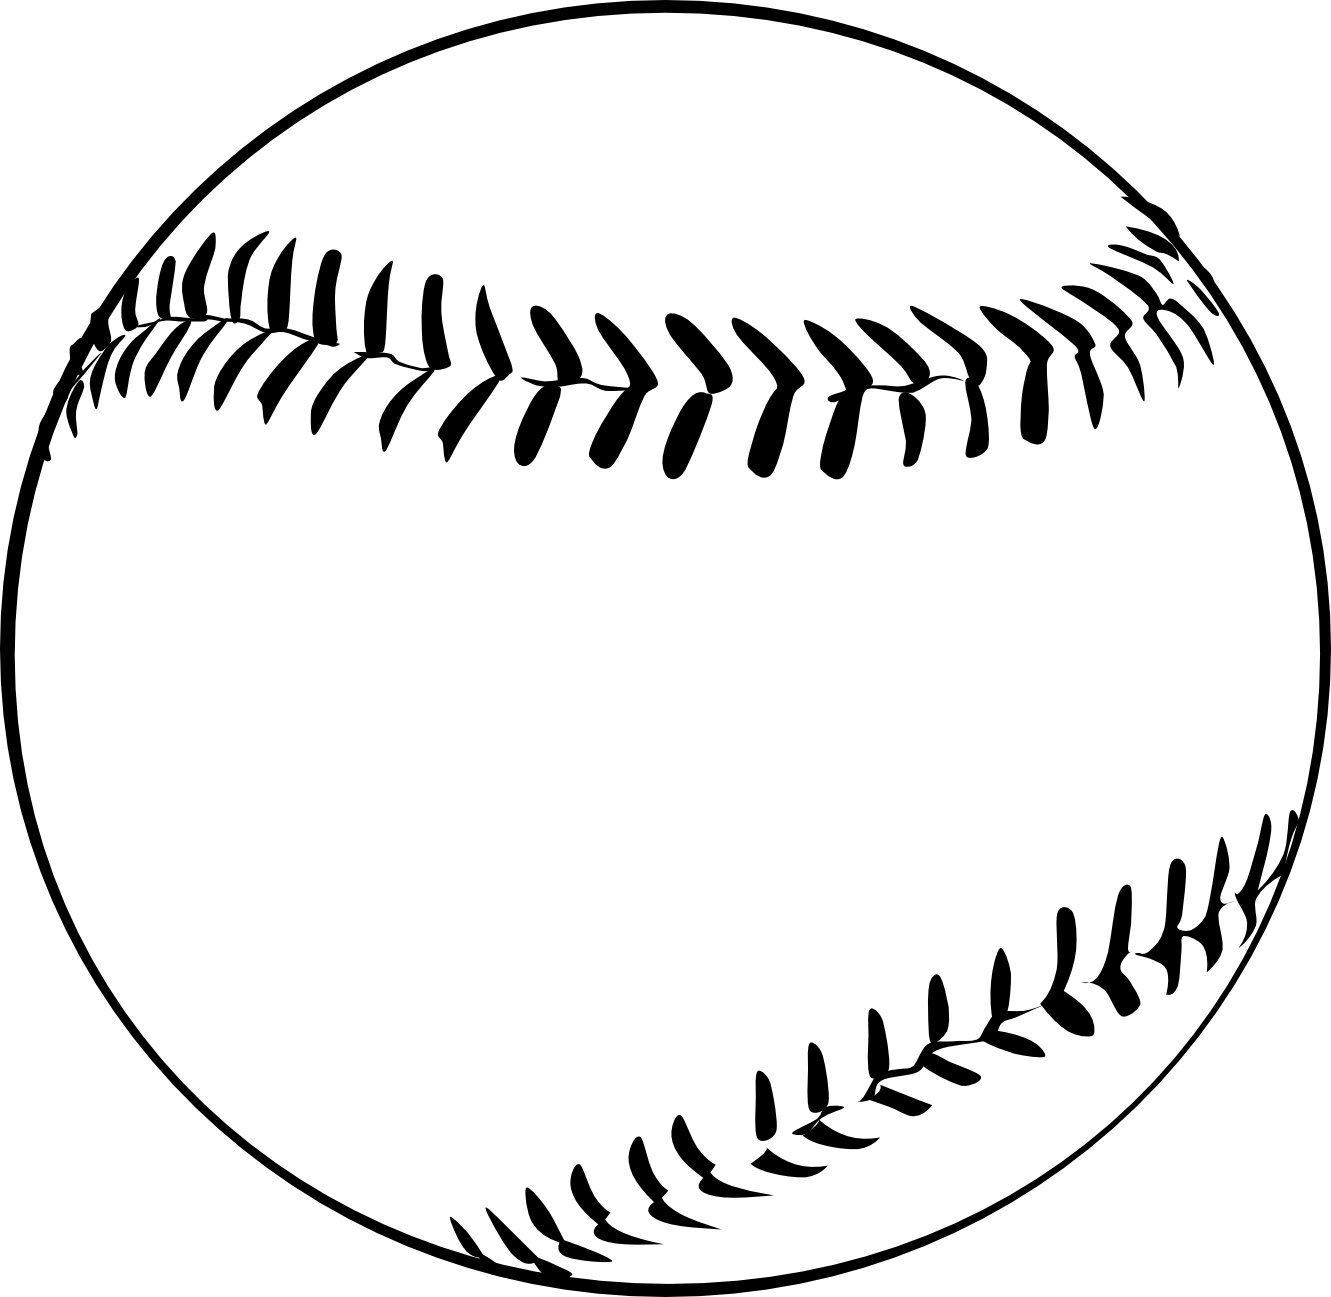 Baseball clipart black and white free clipart images 4